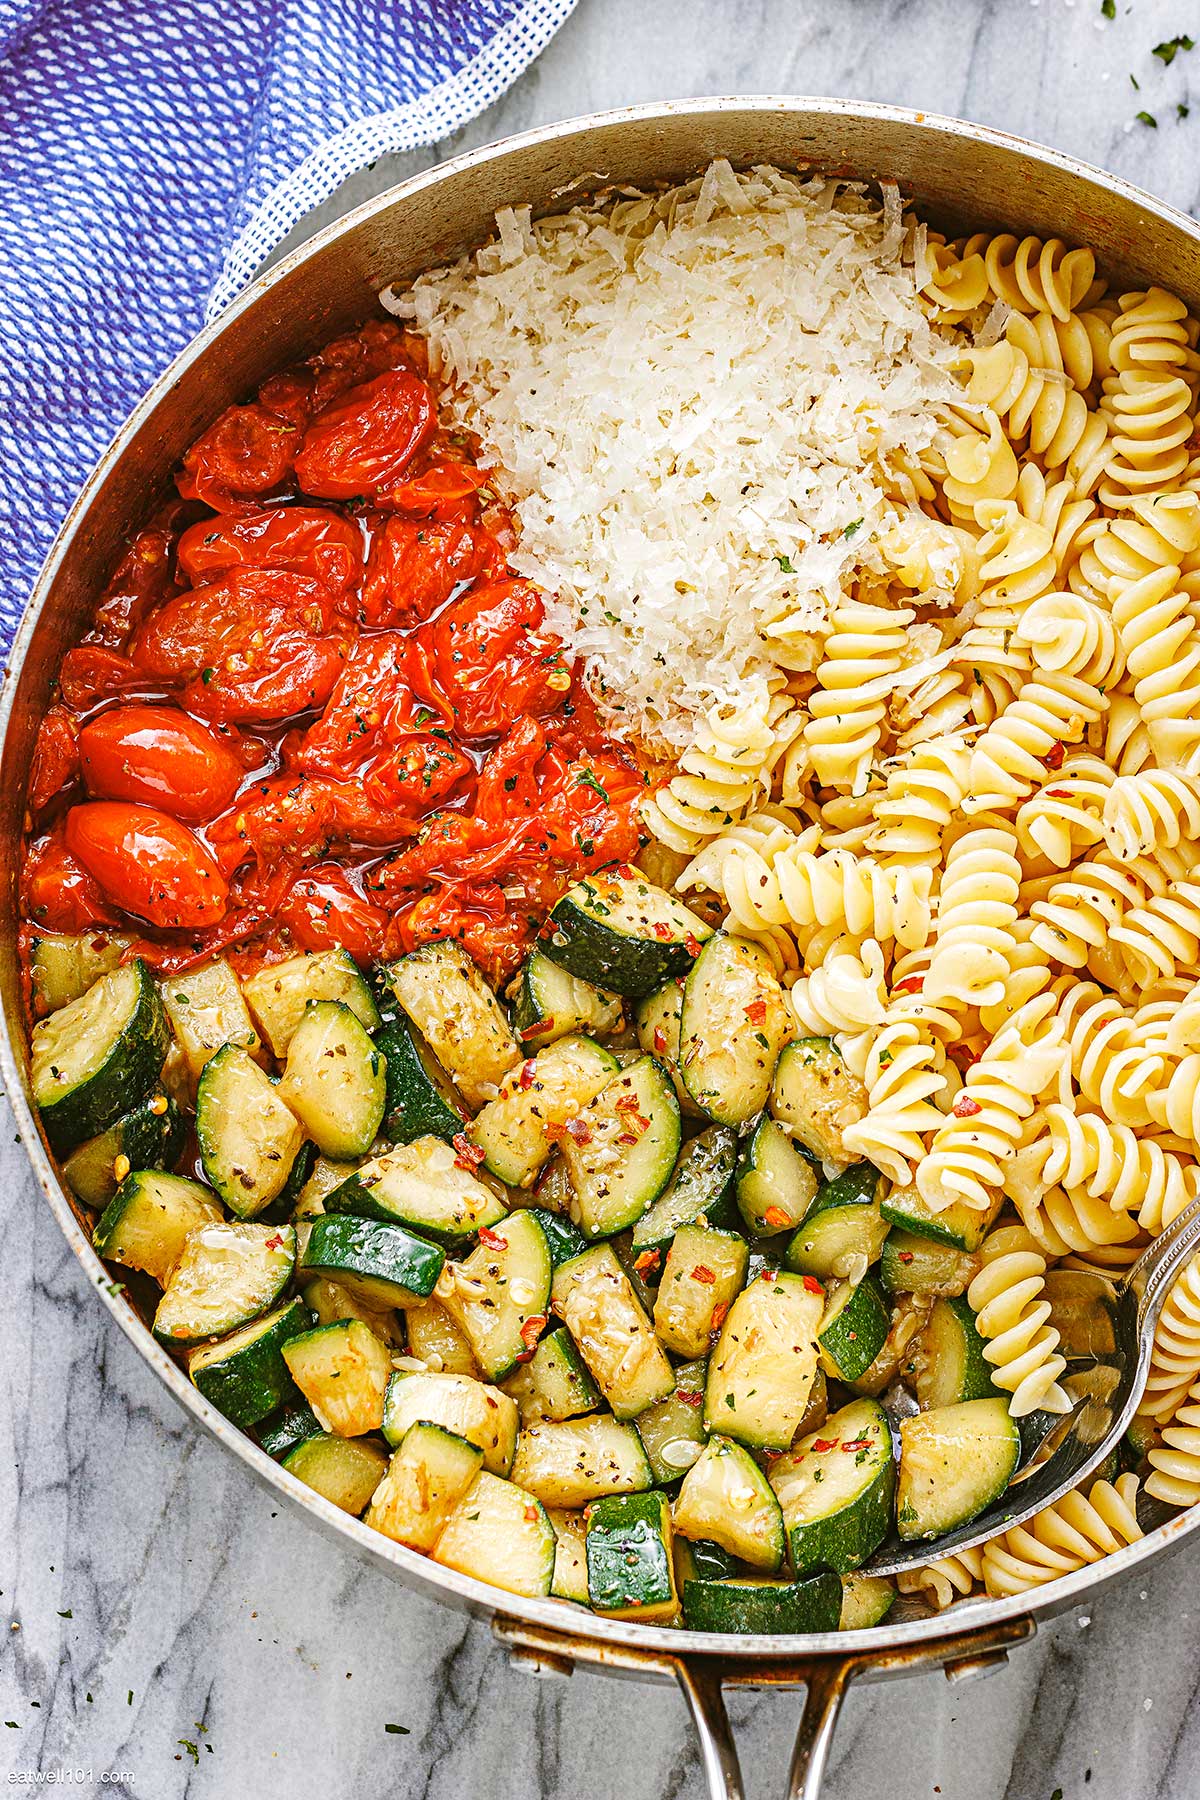 ingredients for pasta with tomato and zucchini